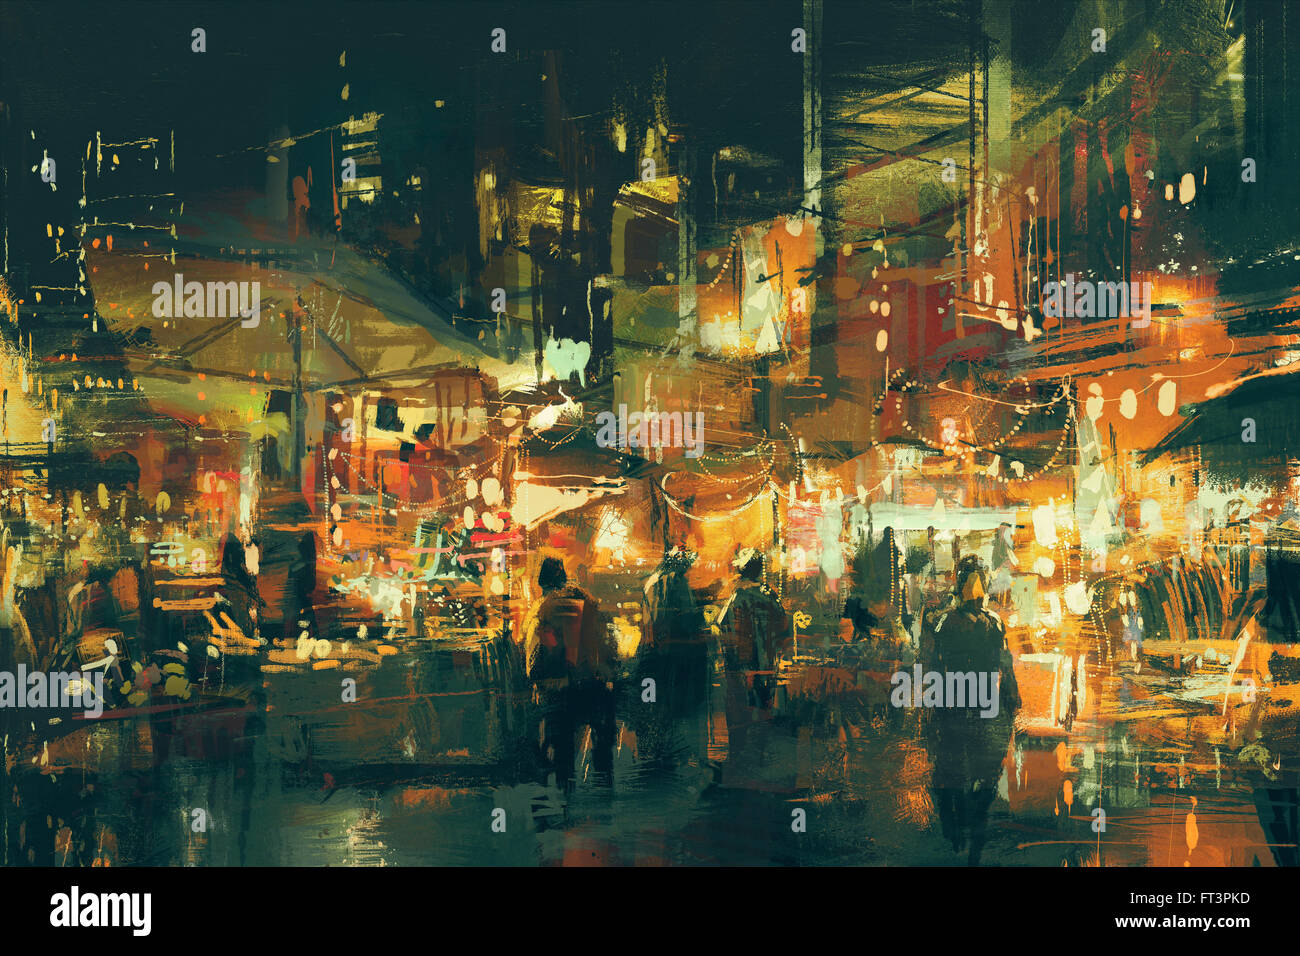 digital painting of people walking in the market at night Stock Photo